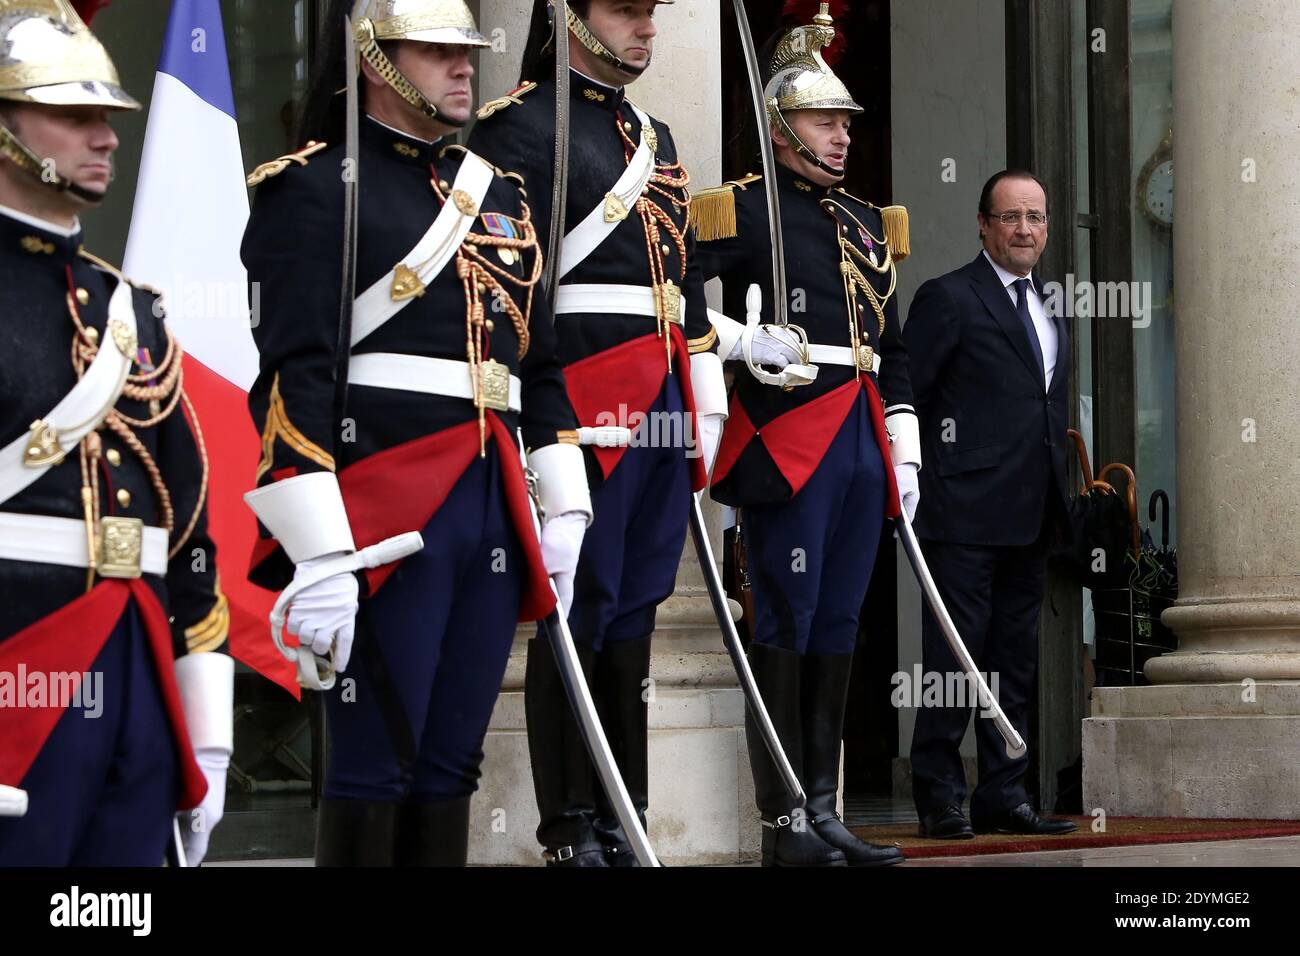 French President Francois Hollande waits to welcome Dubai ruler Sheikh Mohammed bin Rashid al-Maktoum prior to their meeting at the Elysee Palace, in Paris, France on June 13, 2013. Photo by Stephane Lemouton/ABACAPRESS.COM Stock Photo